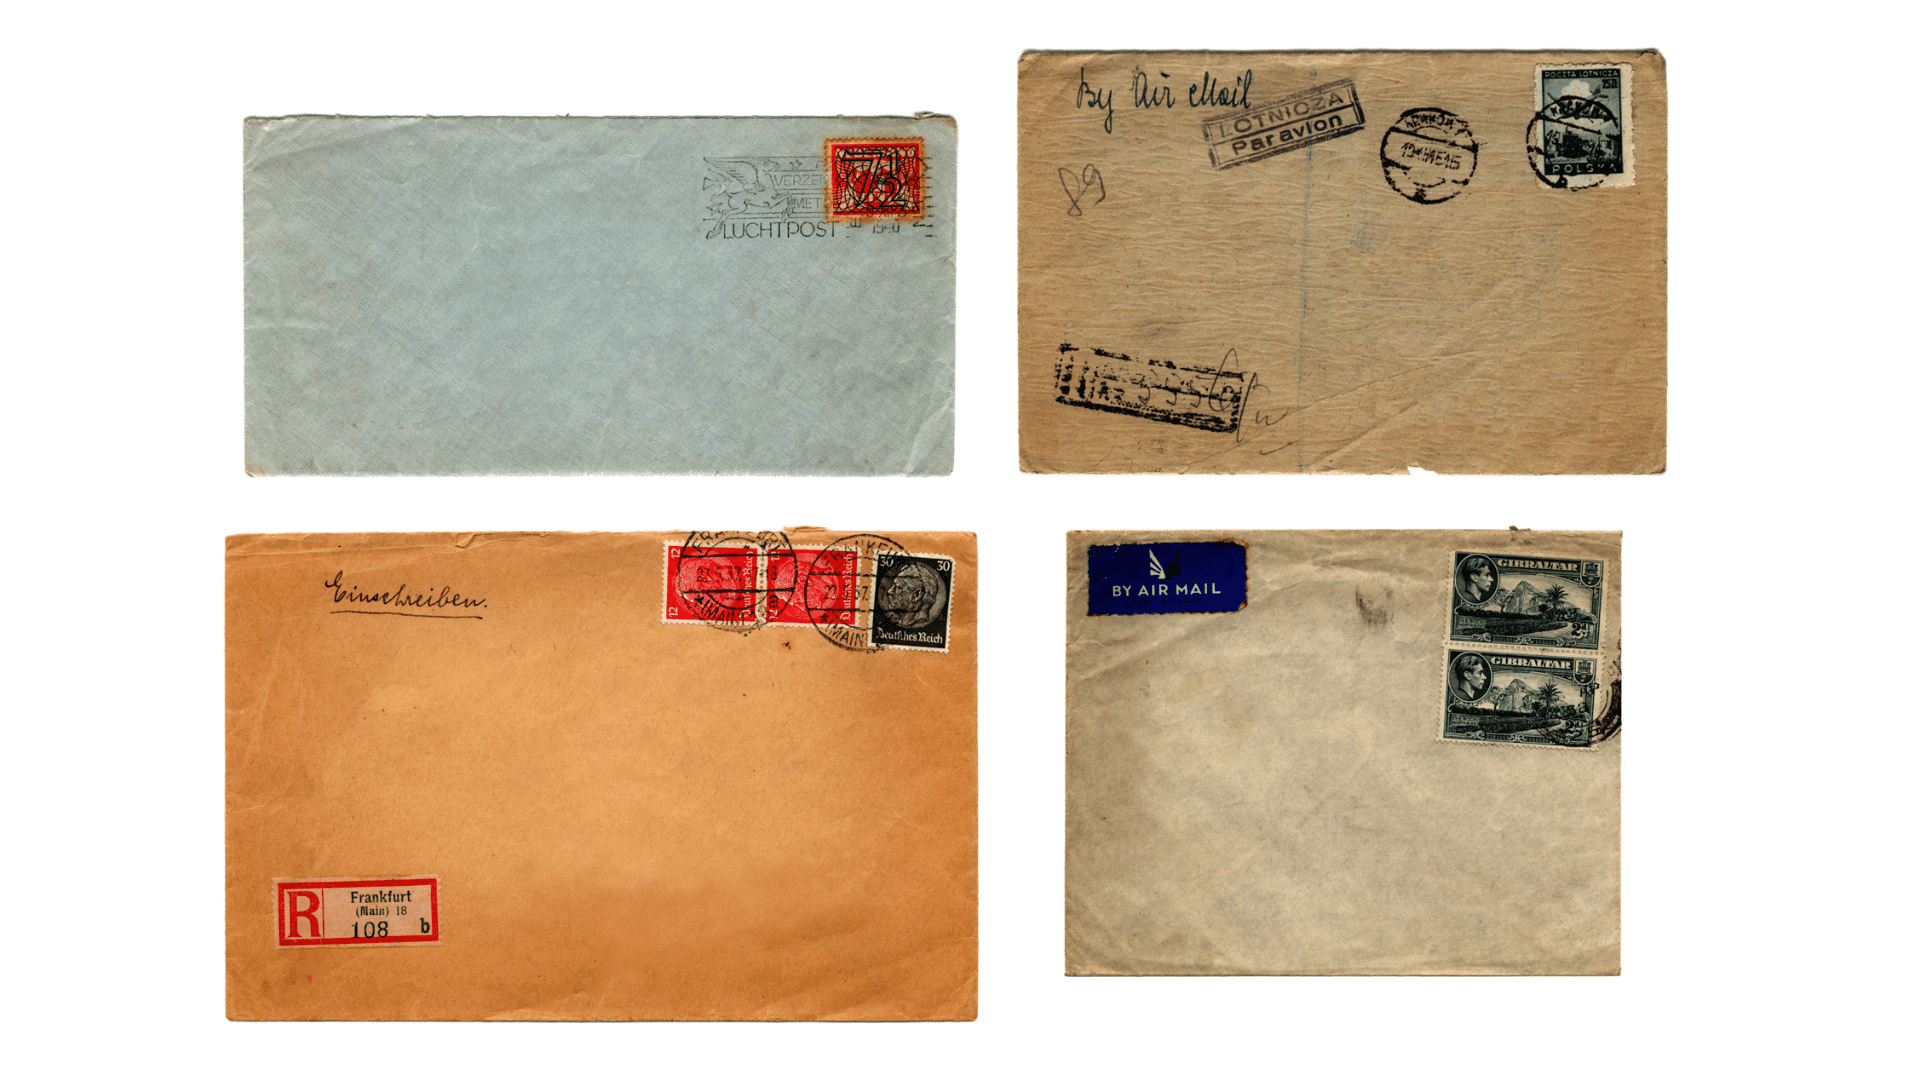 Types of envelopes on different uses